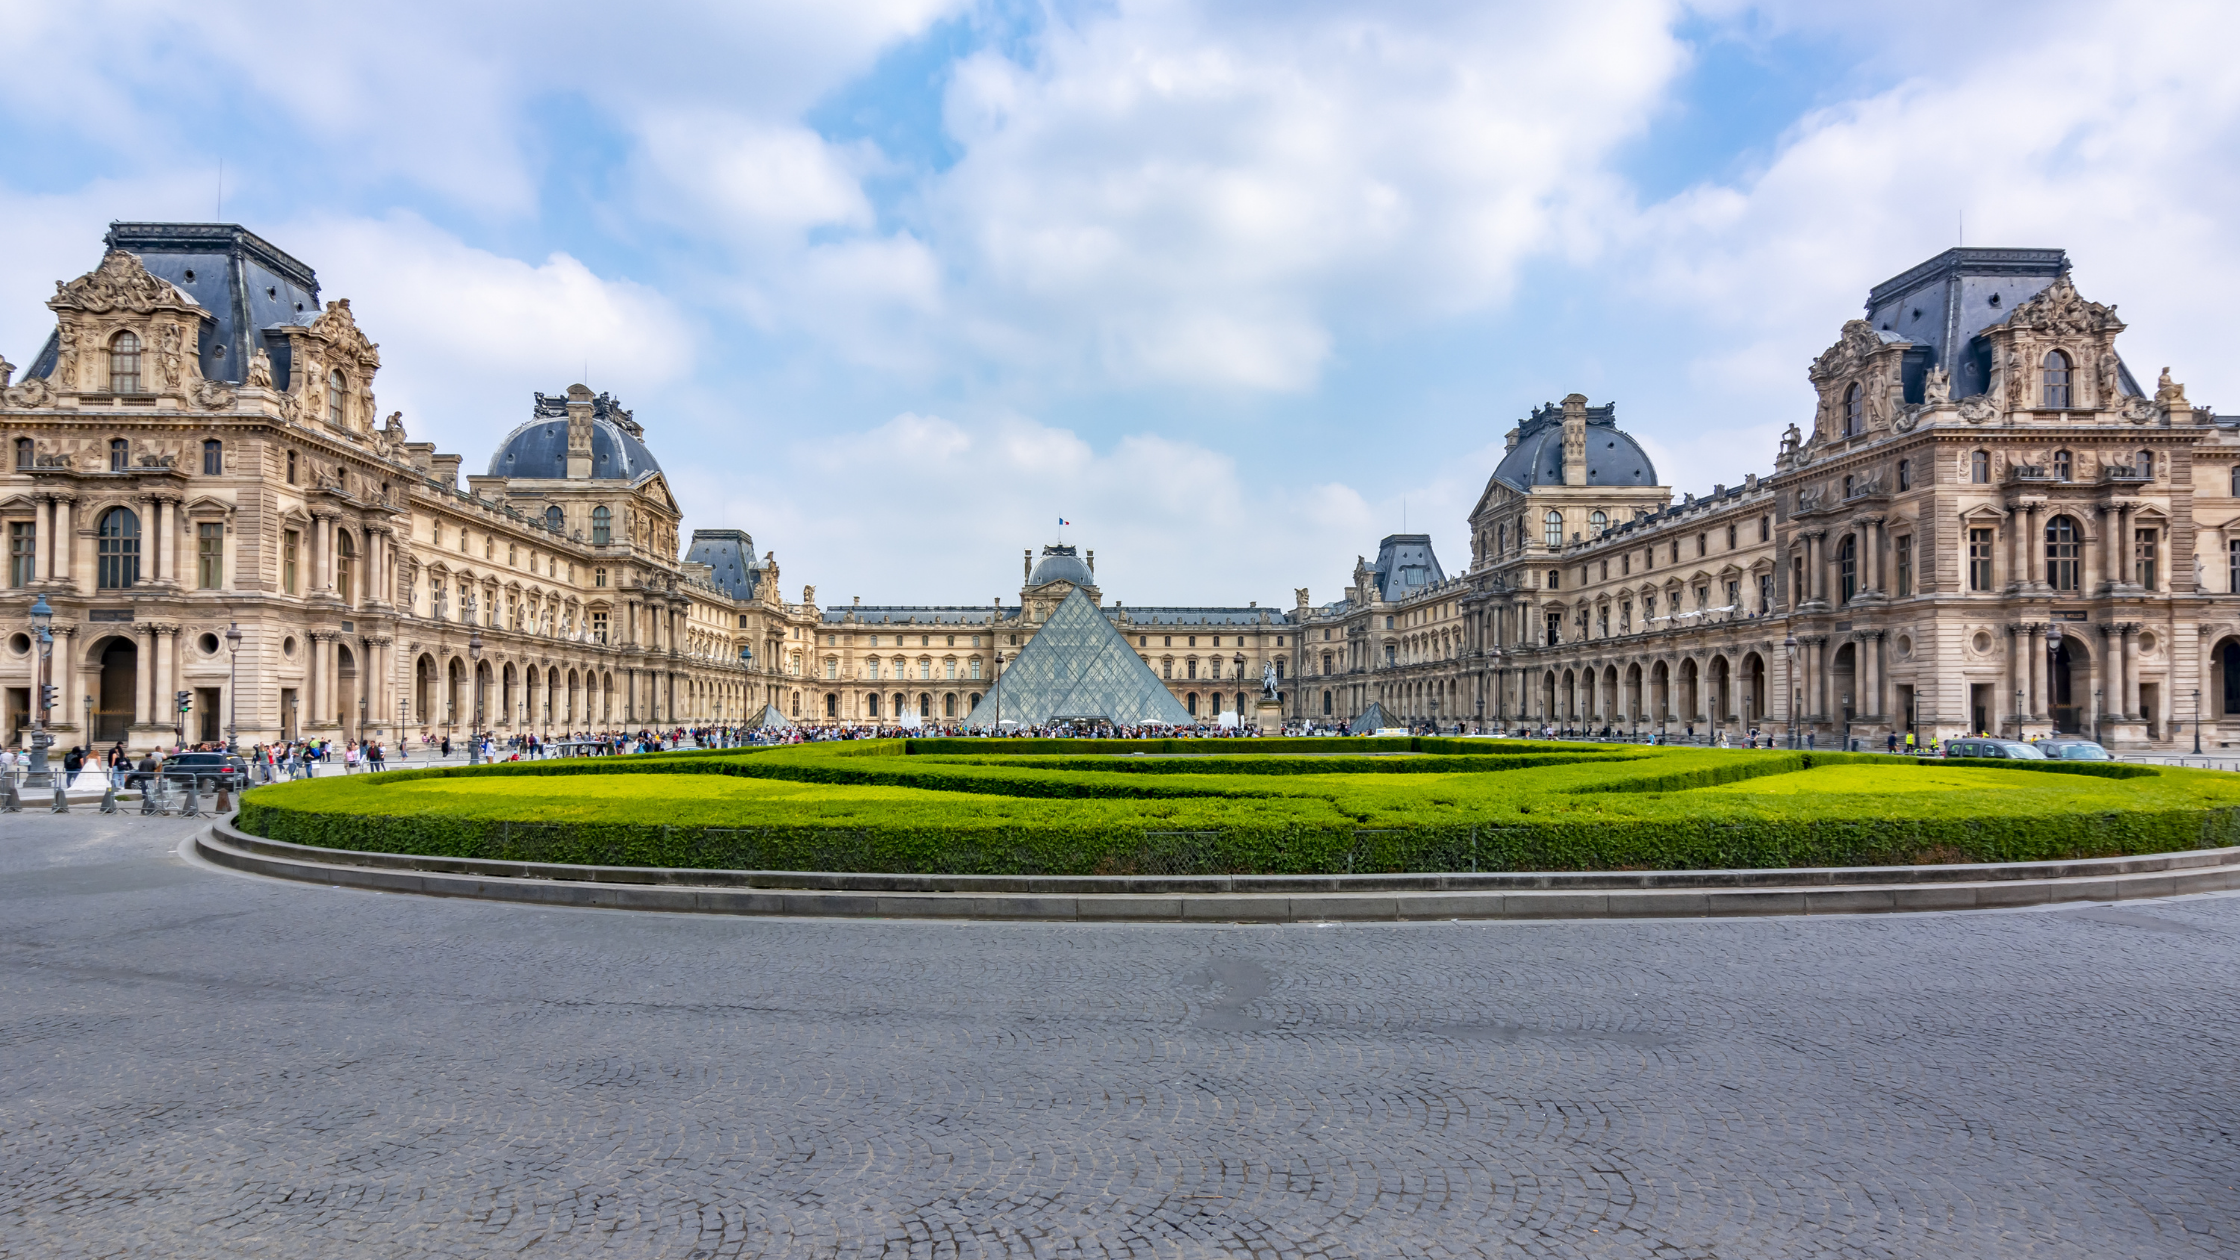 10 cool facts about the Louvre featured image